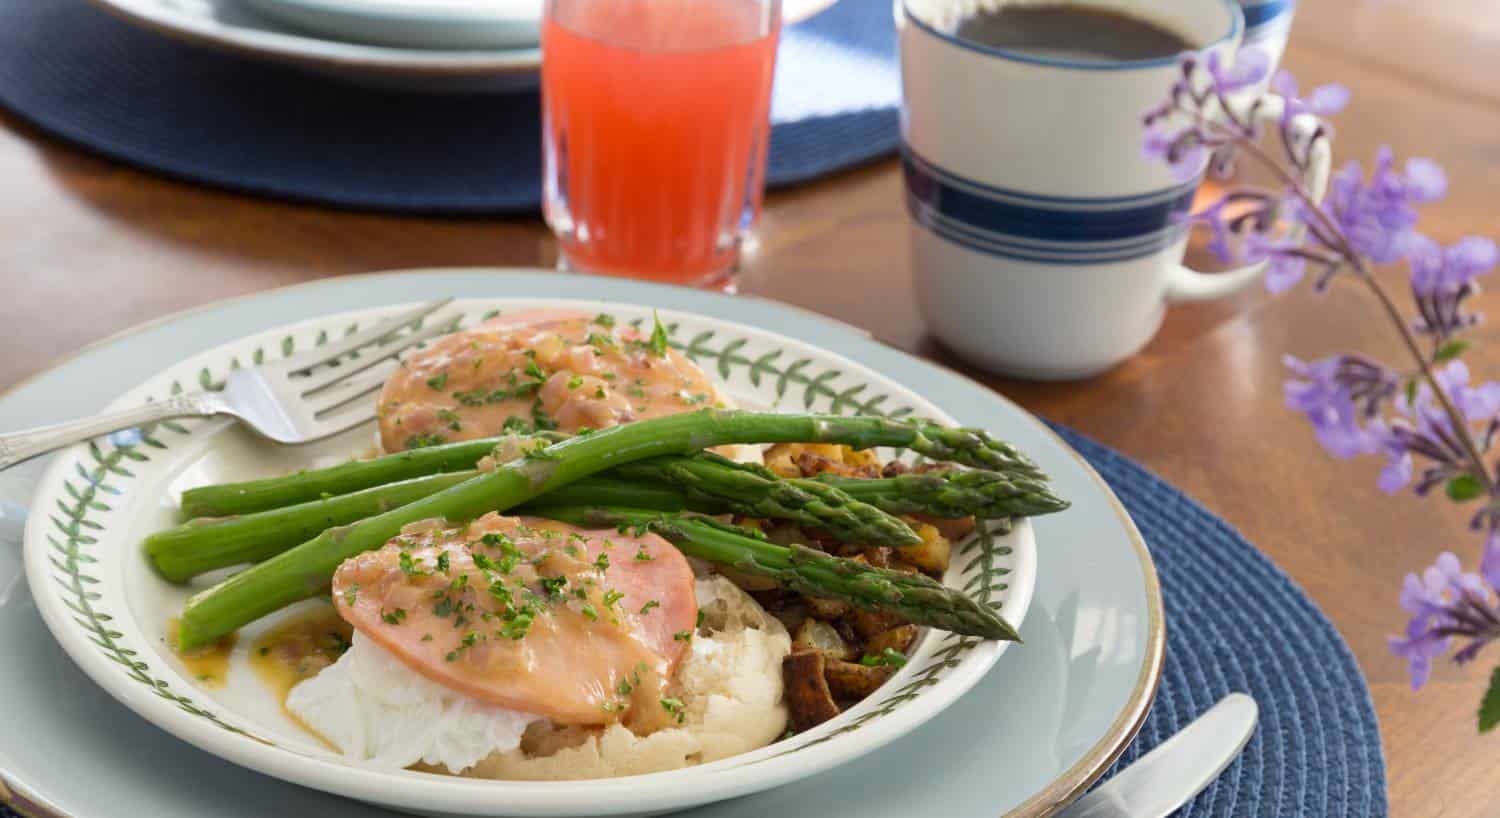 Close up view of breakfast dish with biscuits, eggs, ham, fried potatoes, and asparagus